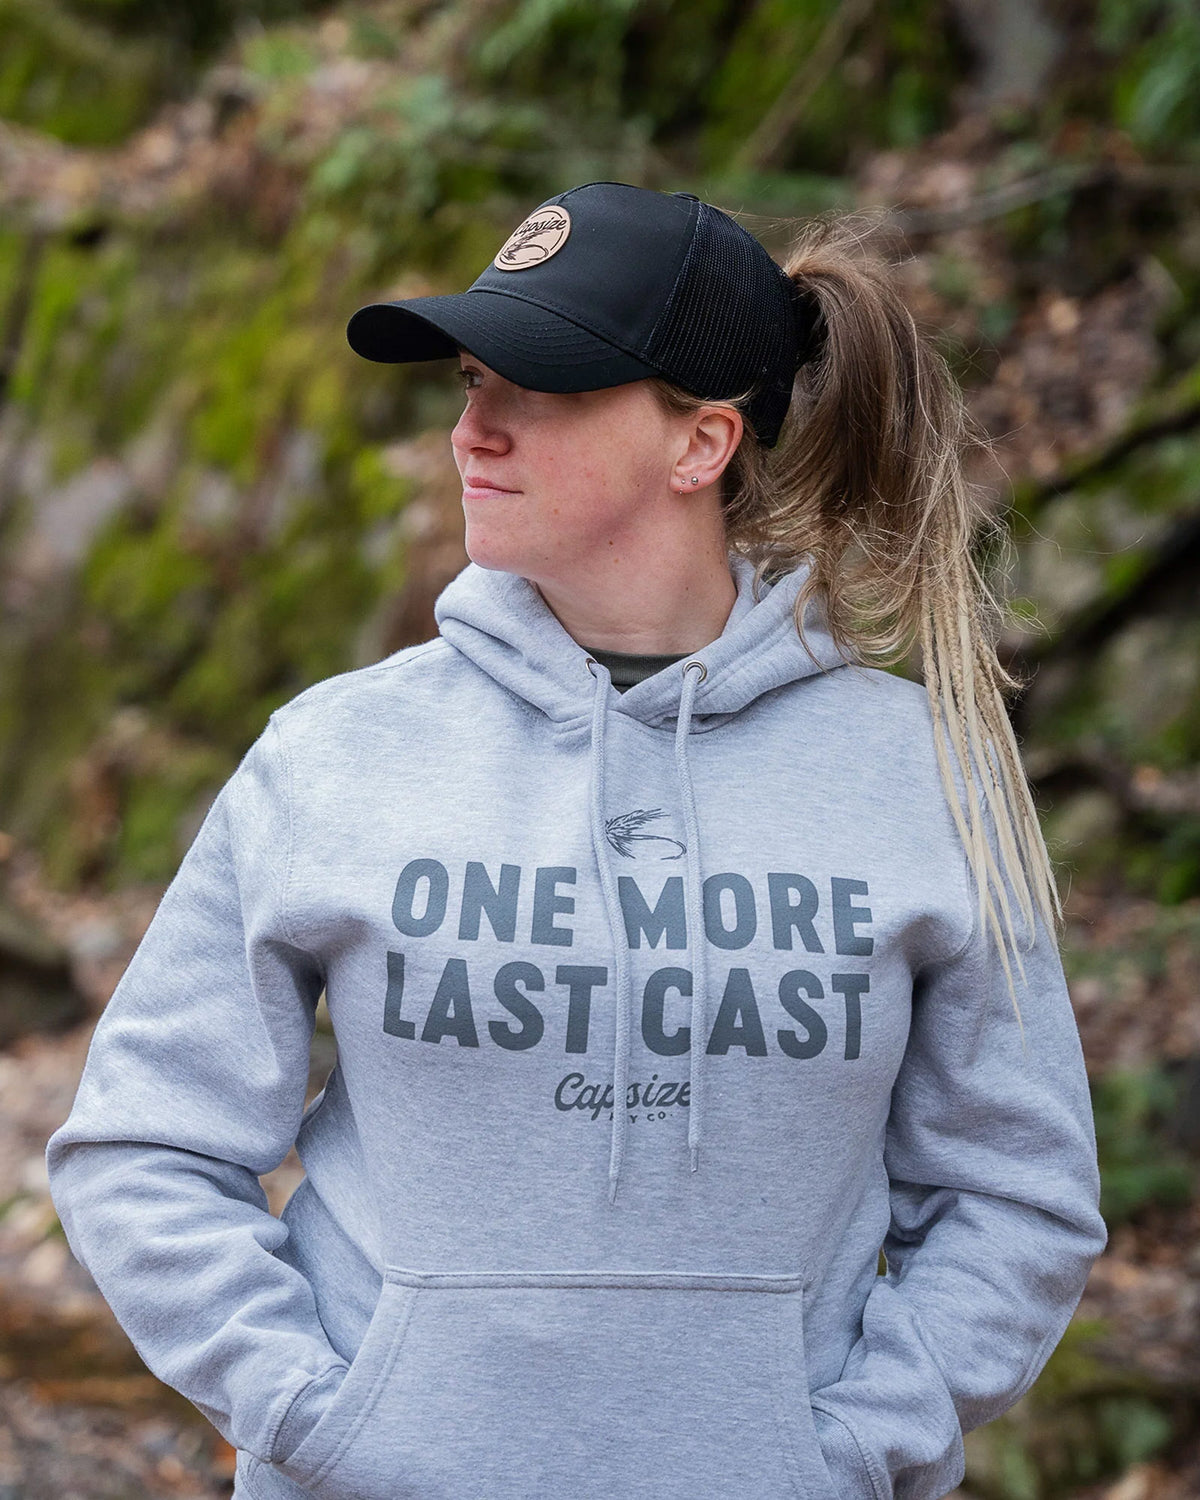 Women's Fly Fishing Clothing For Sale